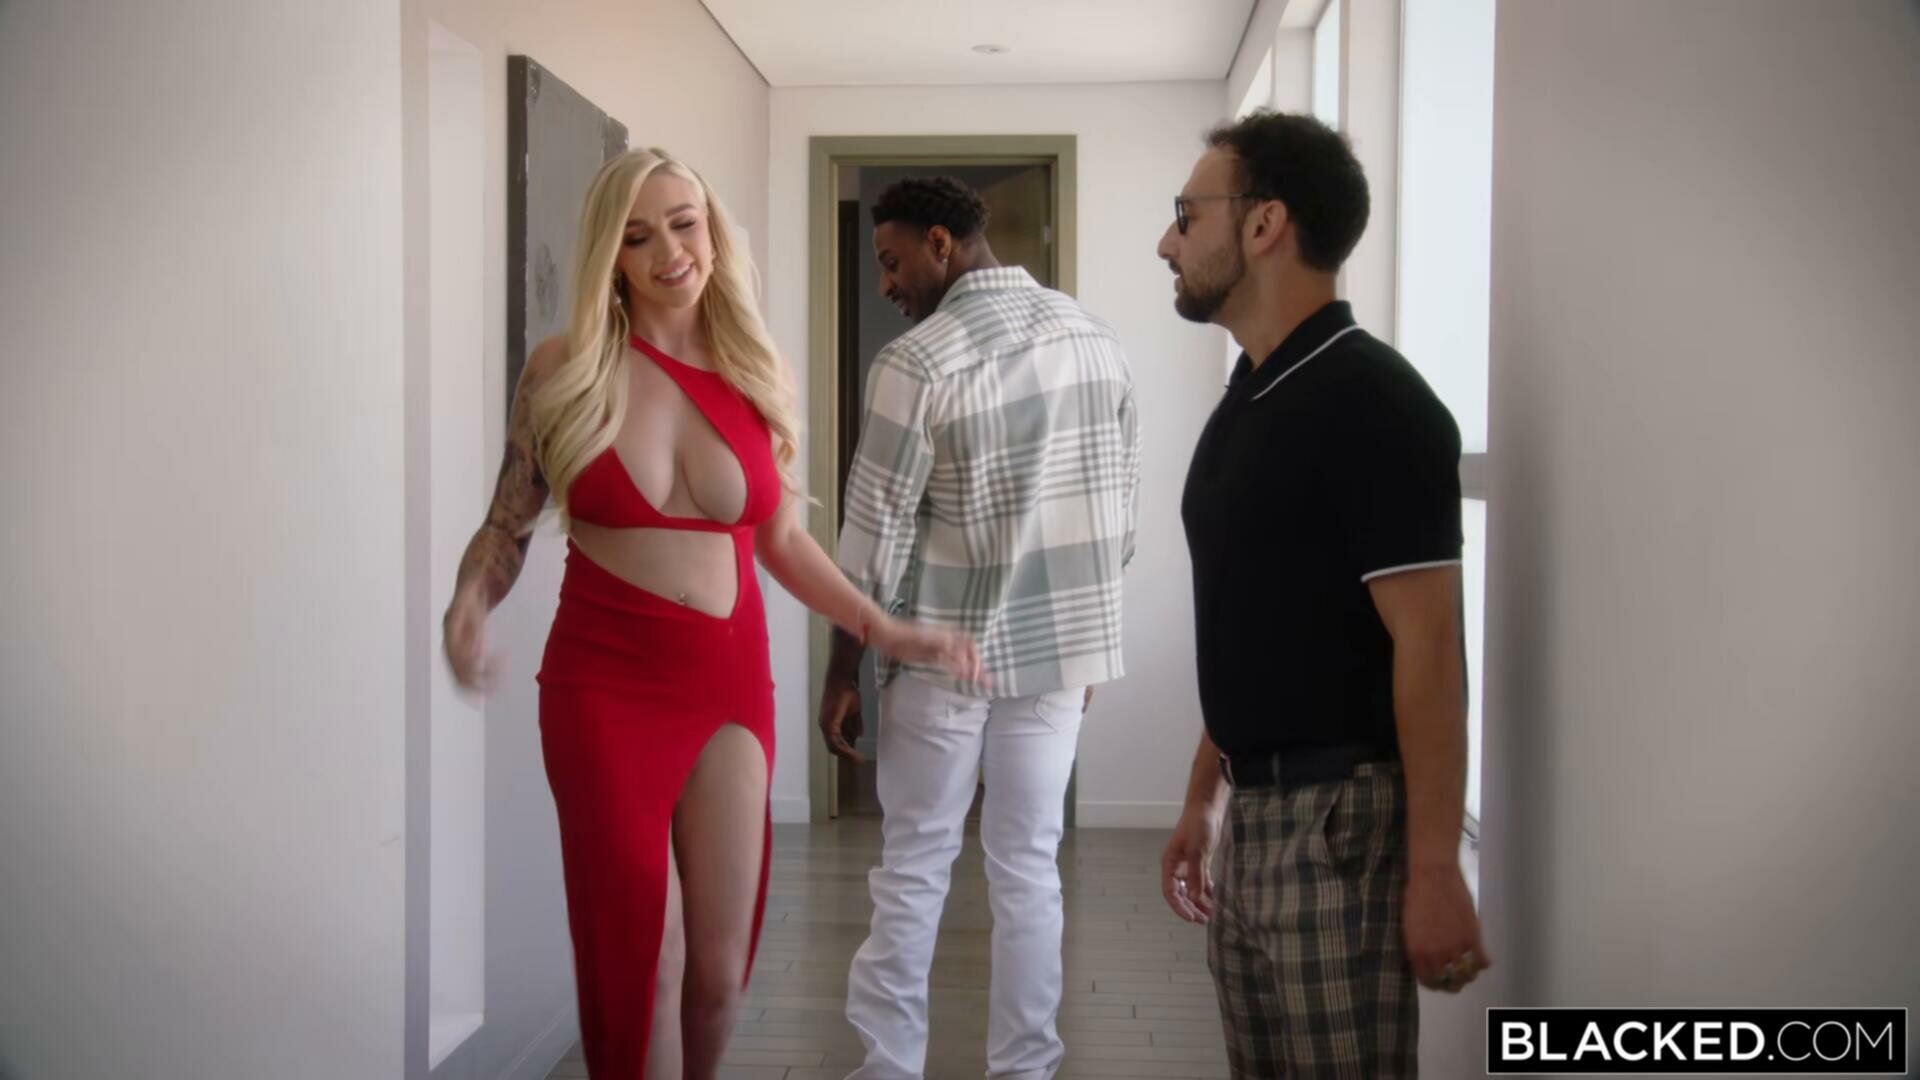 Blacked 24 01 27 Kendra Sunderland Size Queen Kendra Needs A Real BBC To Please Her XXX 1080p HEVC x